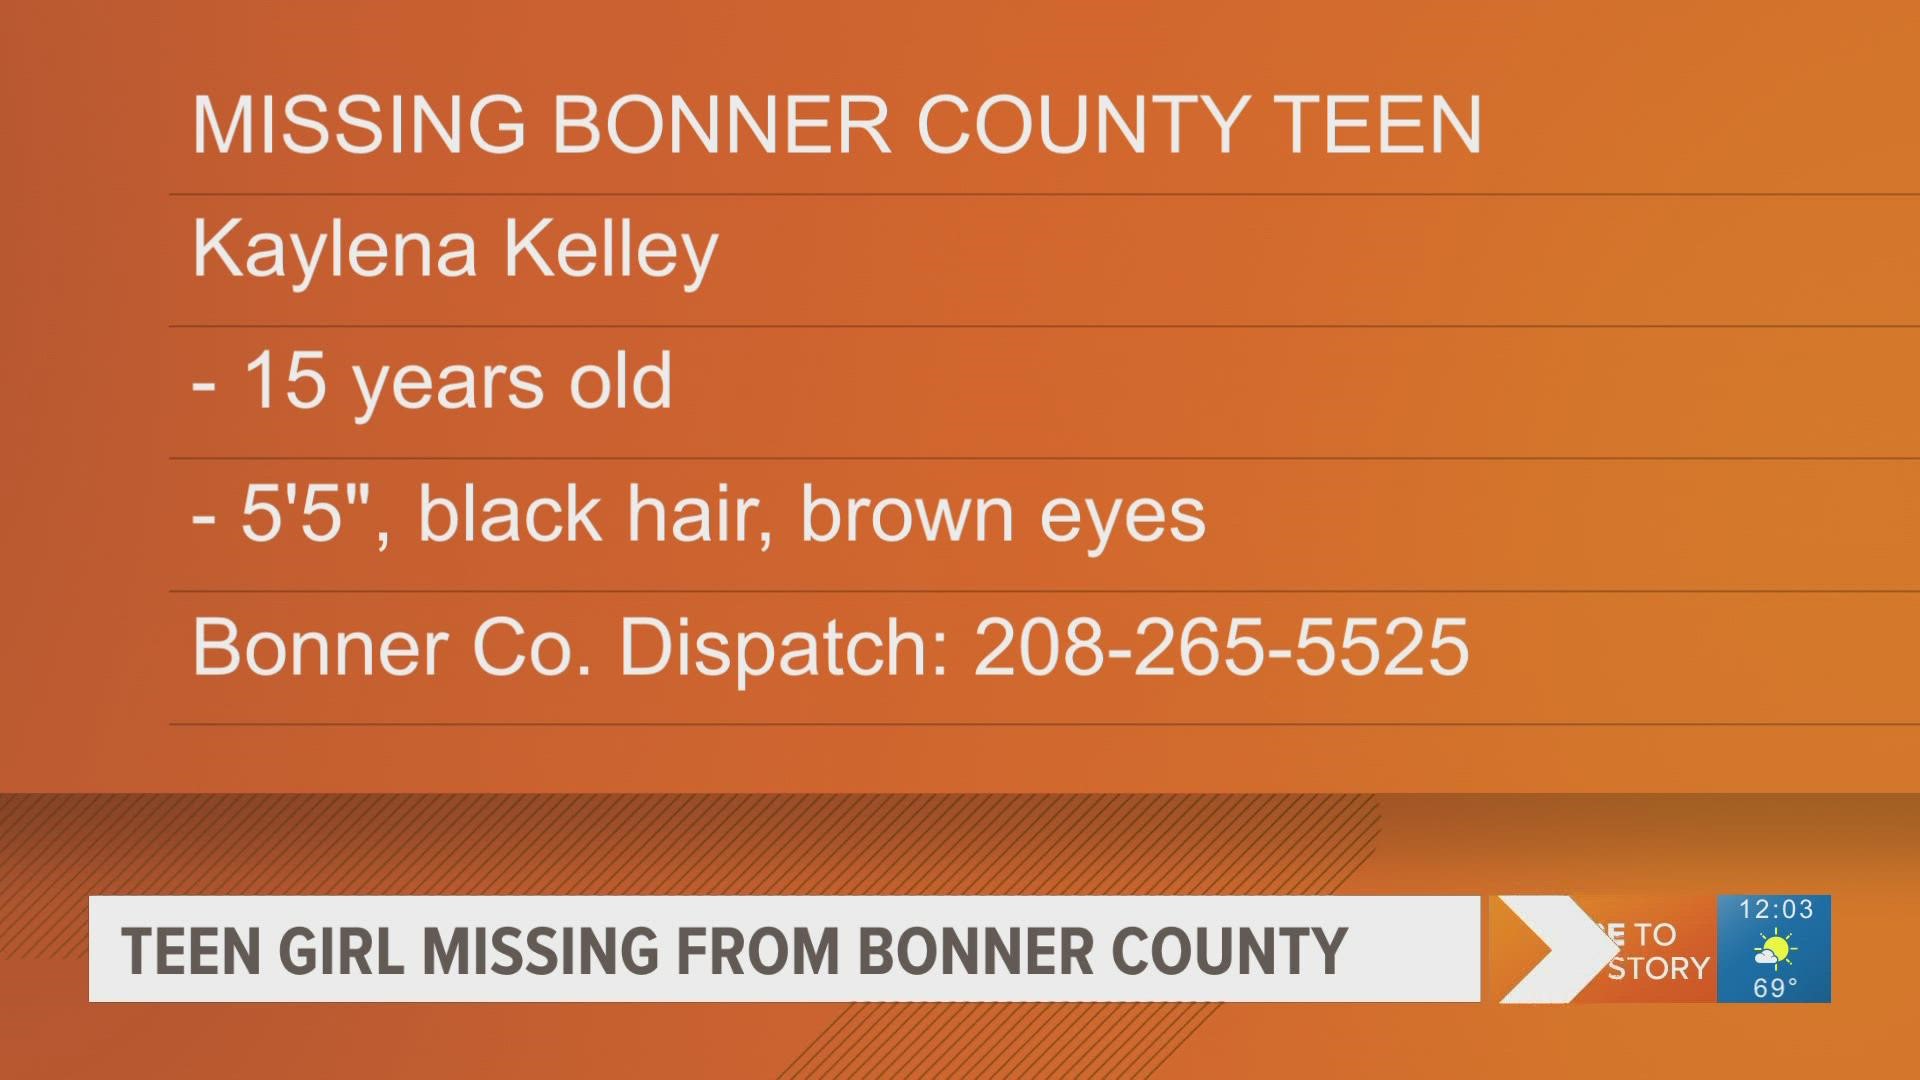 Kaylena Kelley is 15 years old. She is 5’5”, weighs 150 pounds, with black hair and brown eyes.